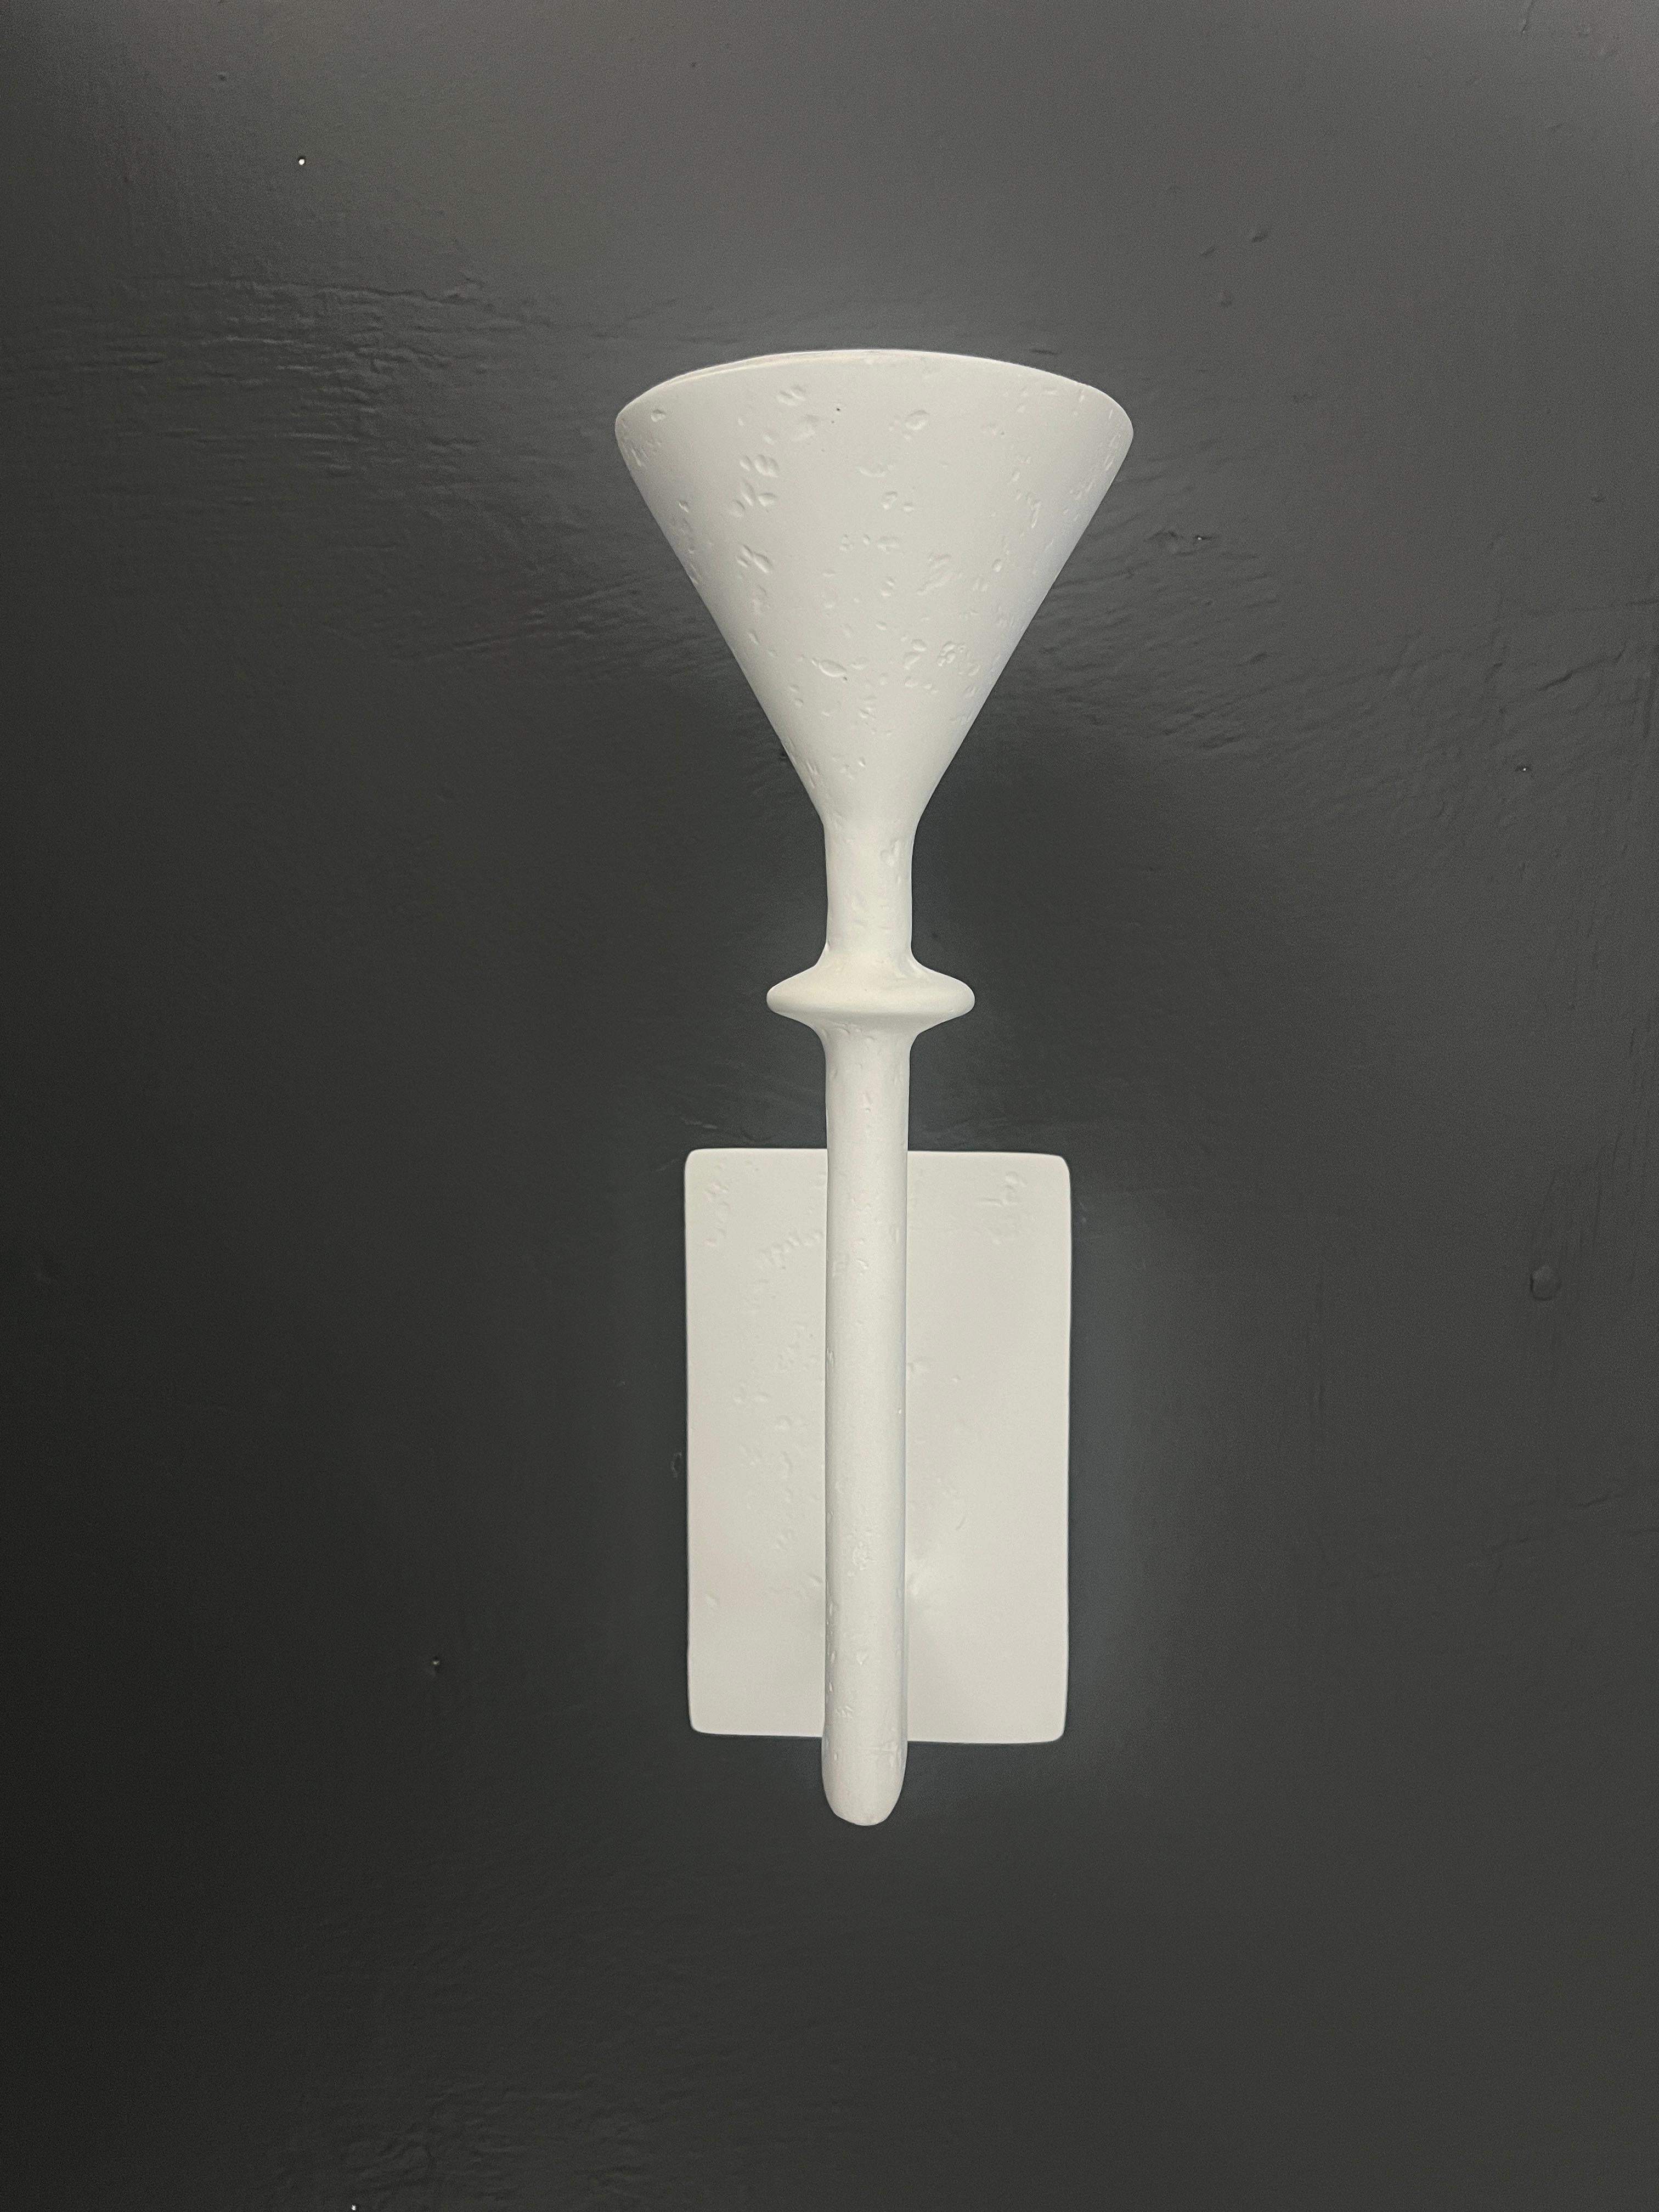 Introducing the Vincennes Primo Sconce, a masterpiece of lighting design that transcends mere illumination to become a work of art. This exquisite wall sconce boasts an organic plaster of Paris finish, evoking the timeless elegance of French